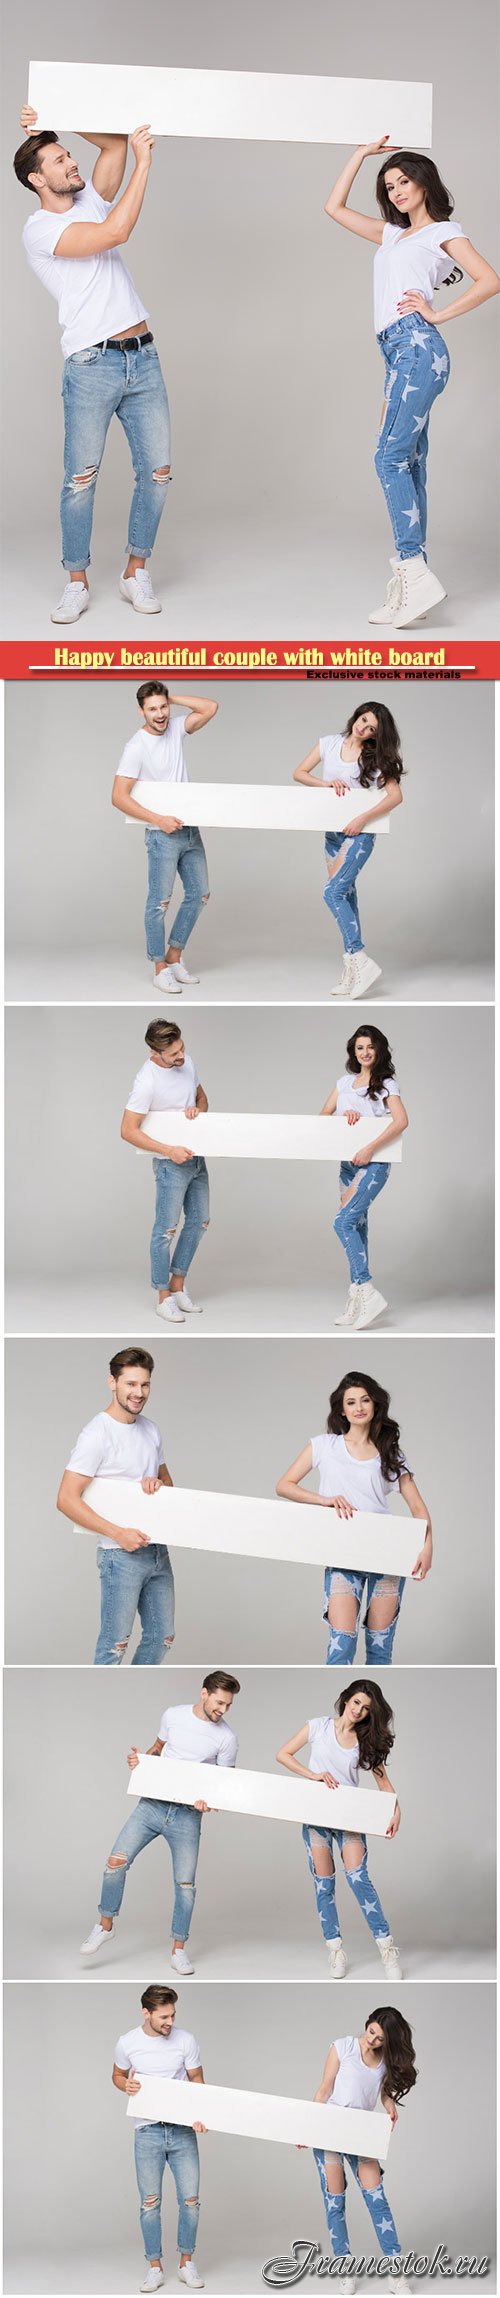 Happy beautiful couple with white board